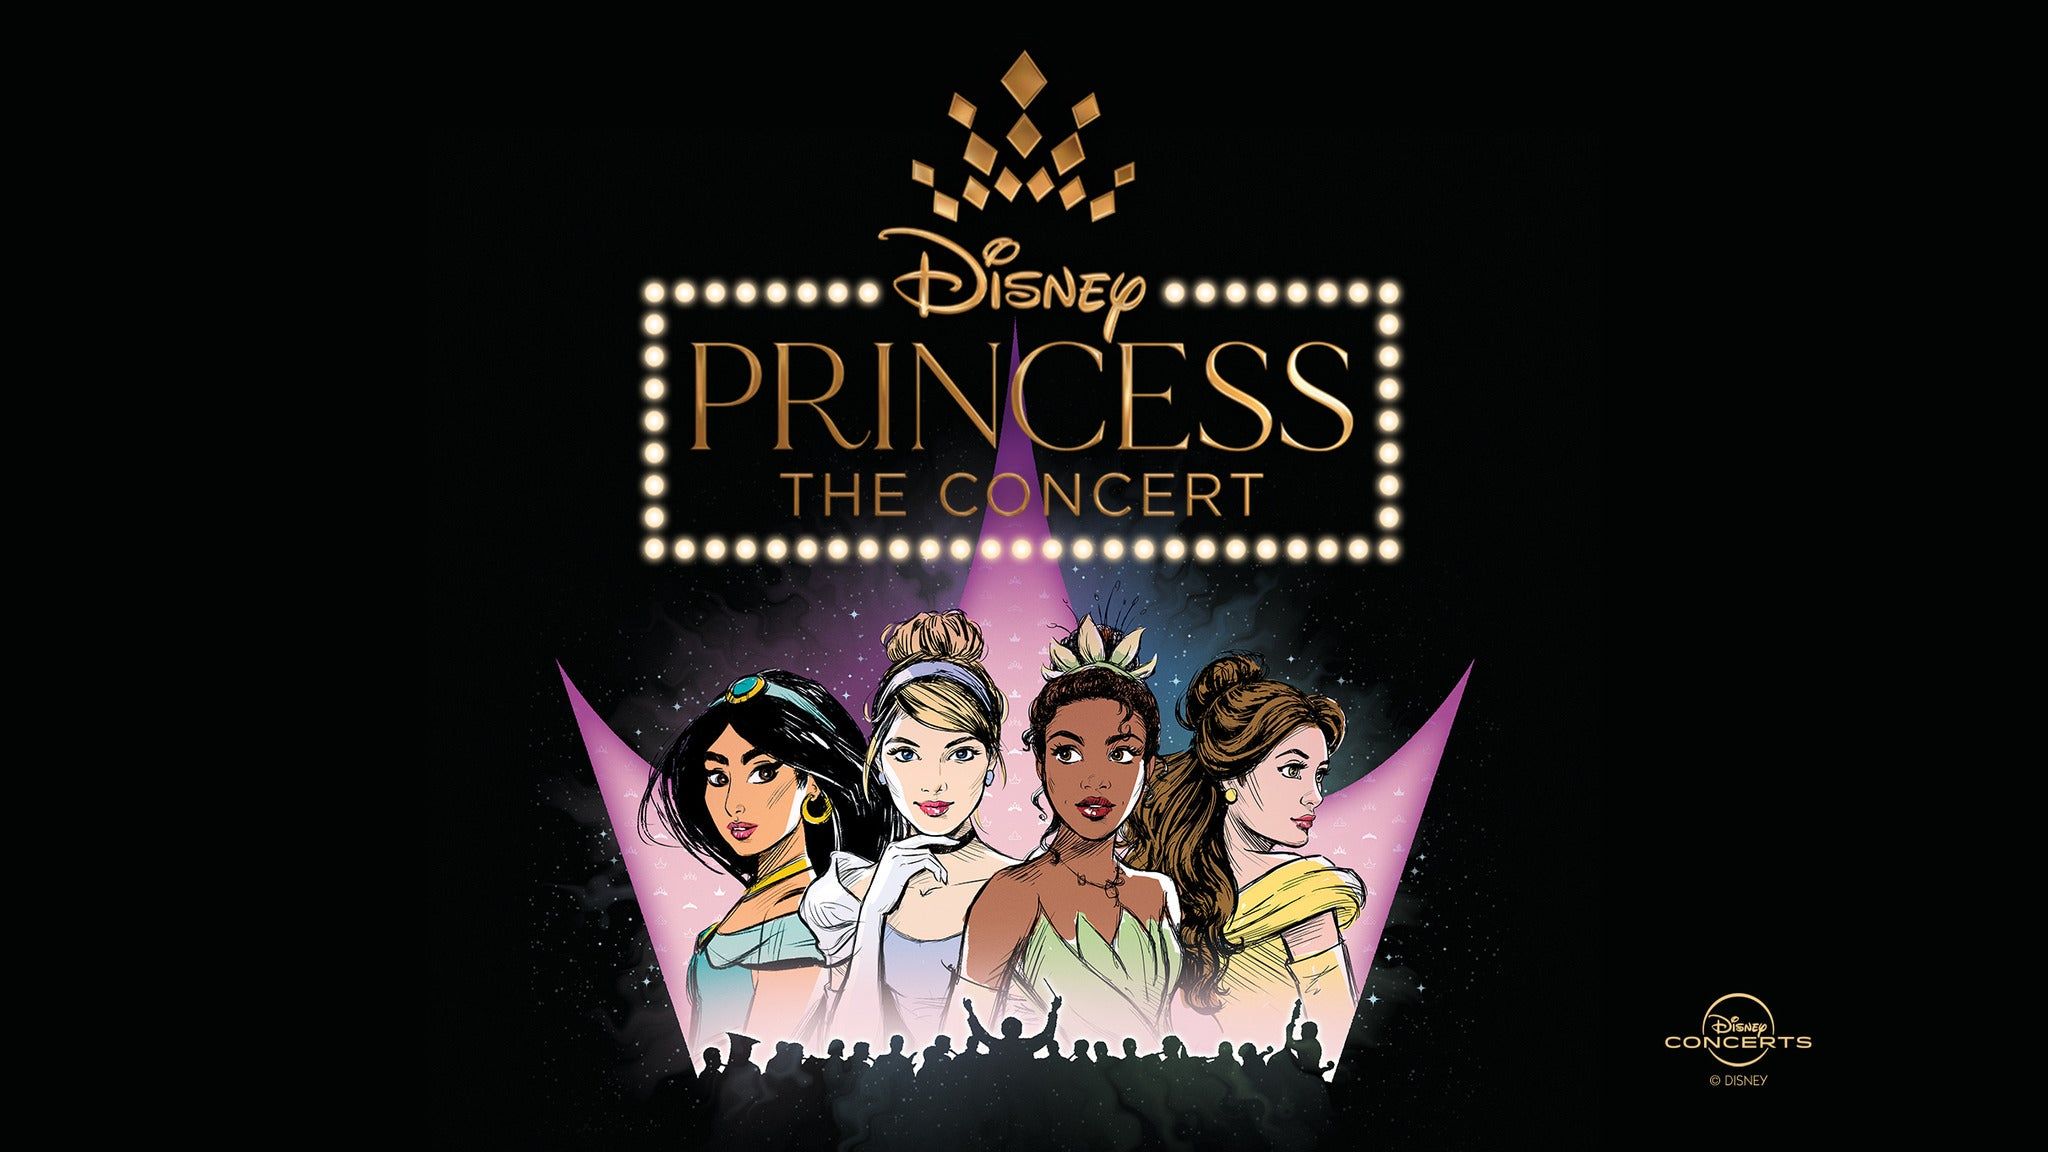 Disney Princess: The Concert tour dates, presales, tickets and more. Box Office Hero